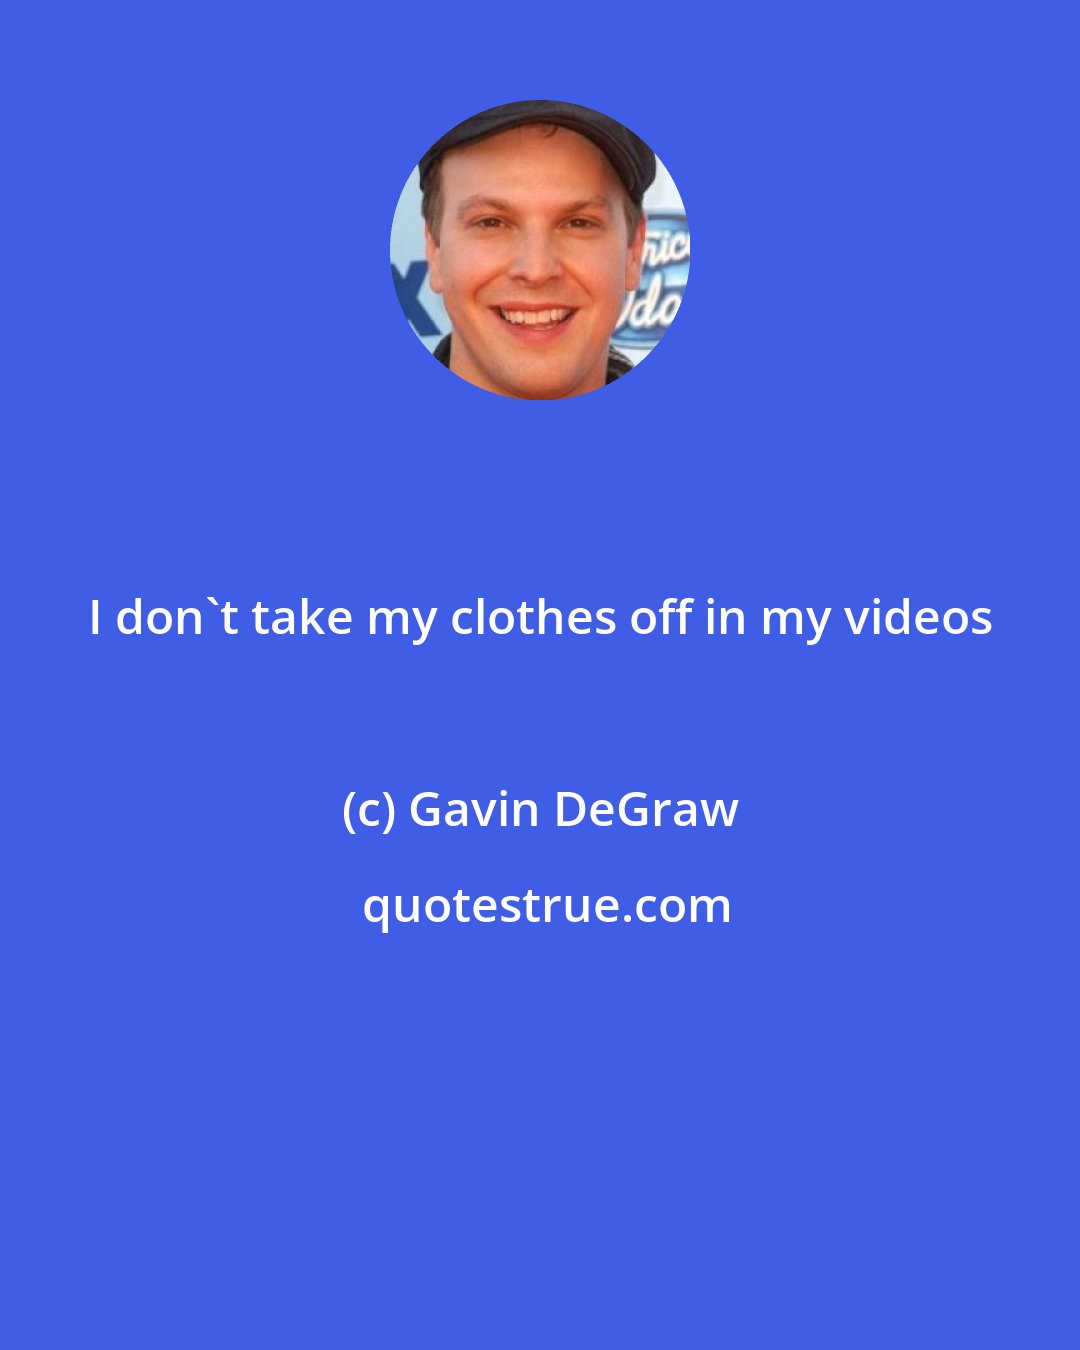 Gavin DeGraw: I don't take my clothes off in my videos